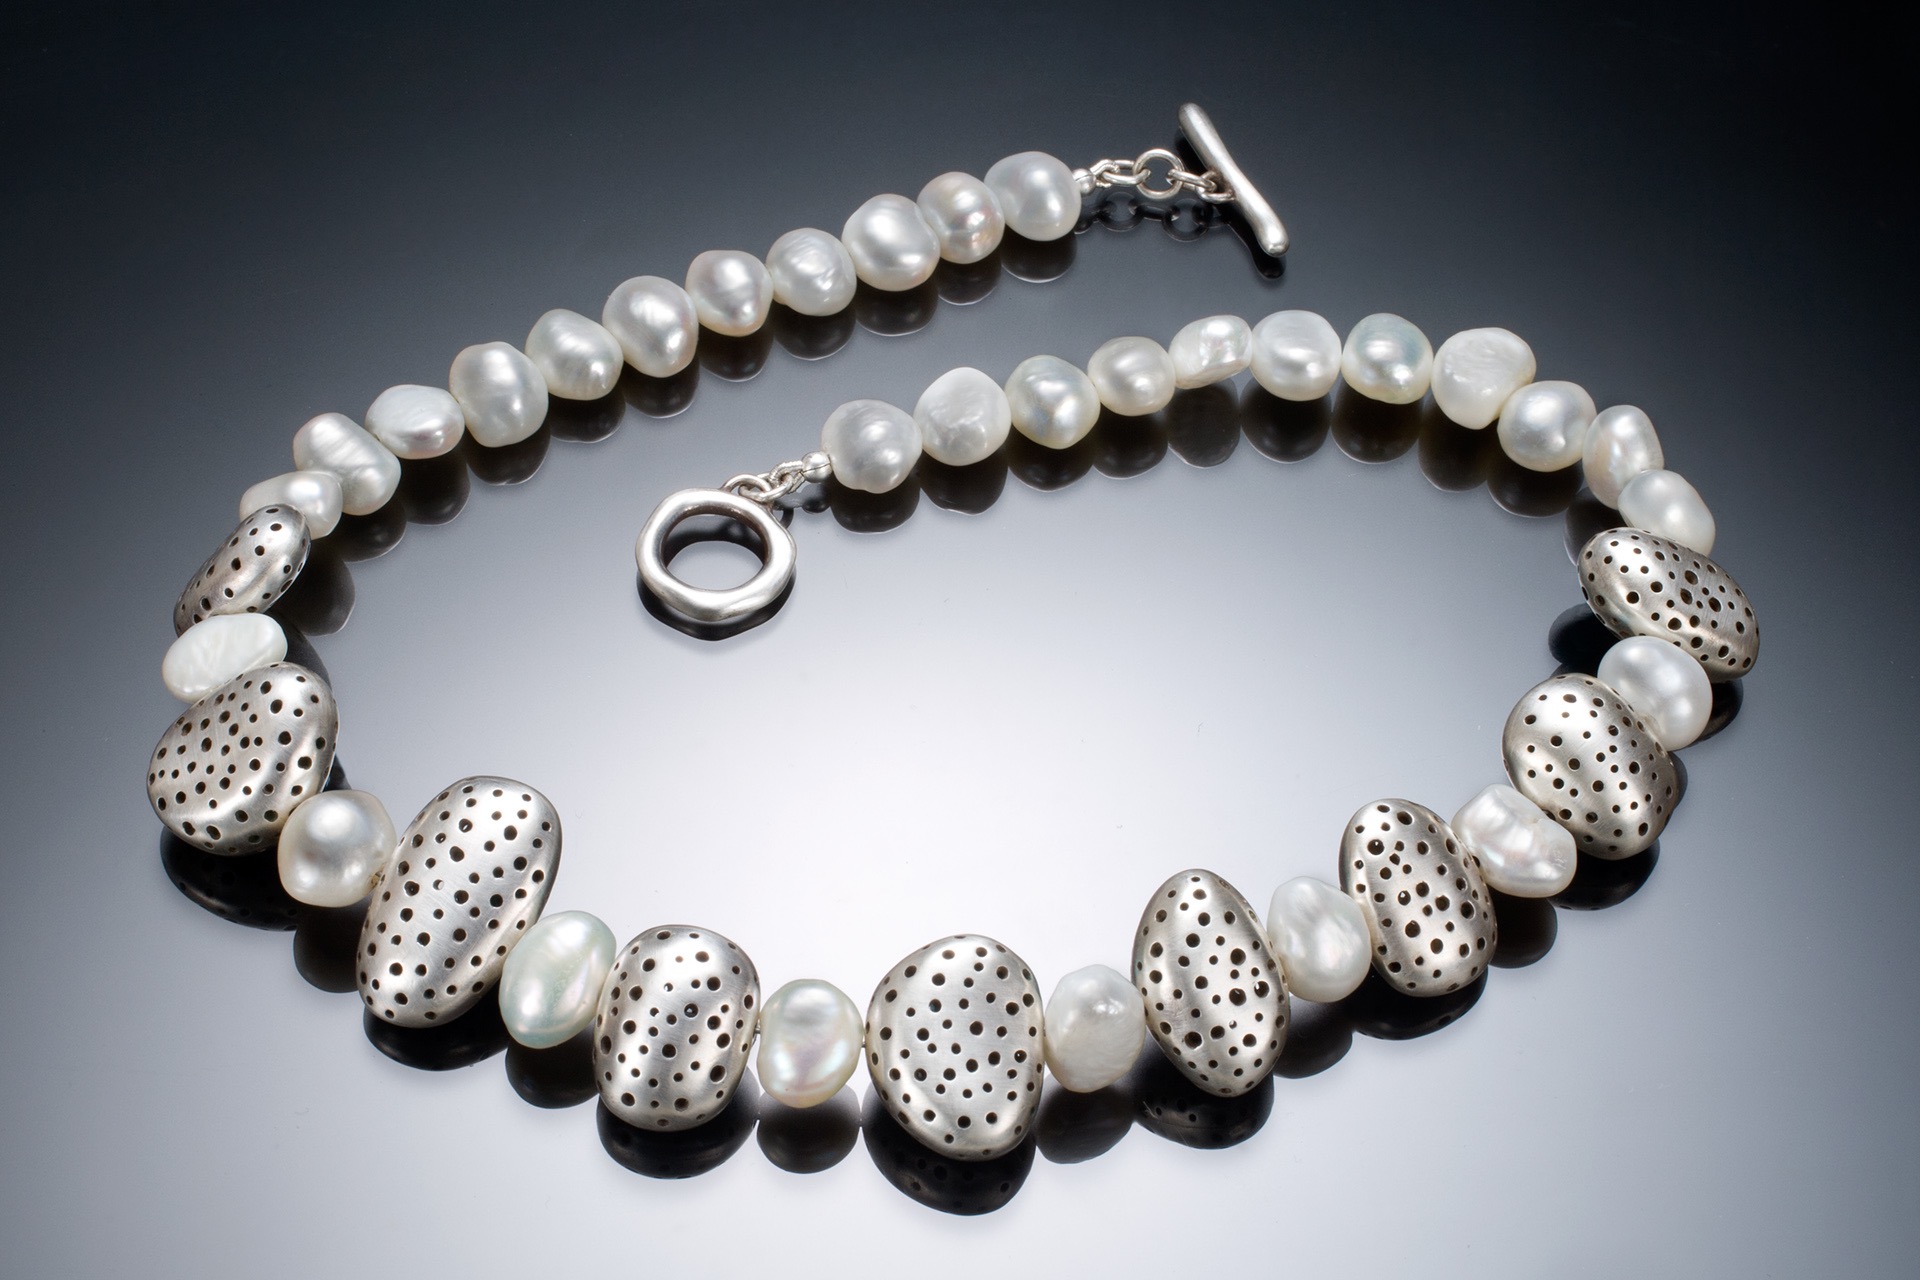 Pebbles and Pearls Necklace